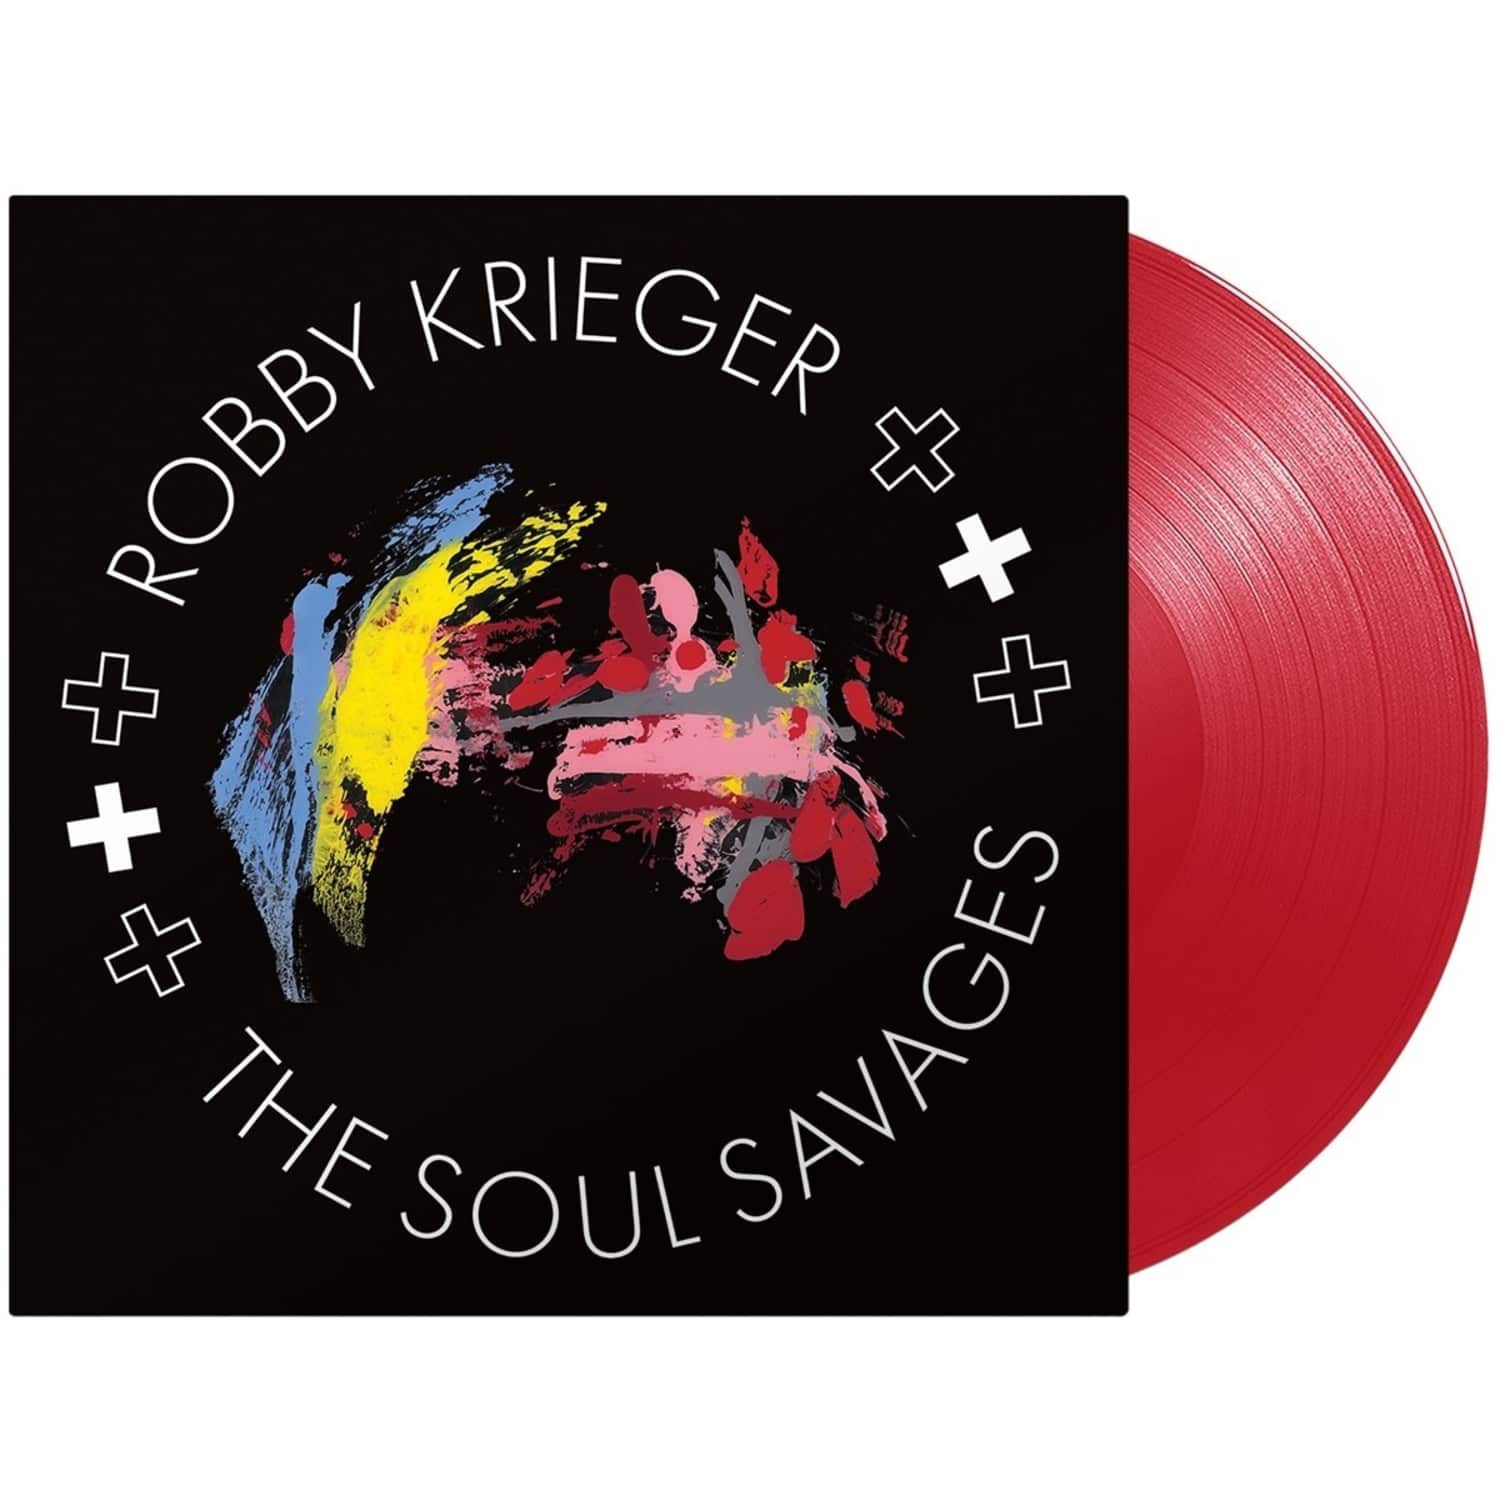 Robby Krieger - ROBBY KRIEGER AND THE SOUL SAVAGES 